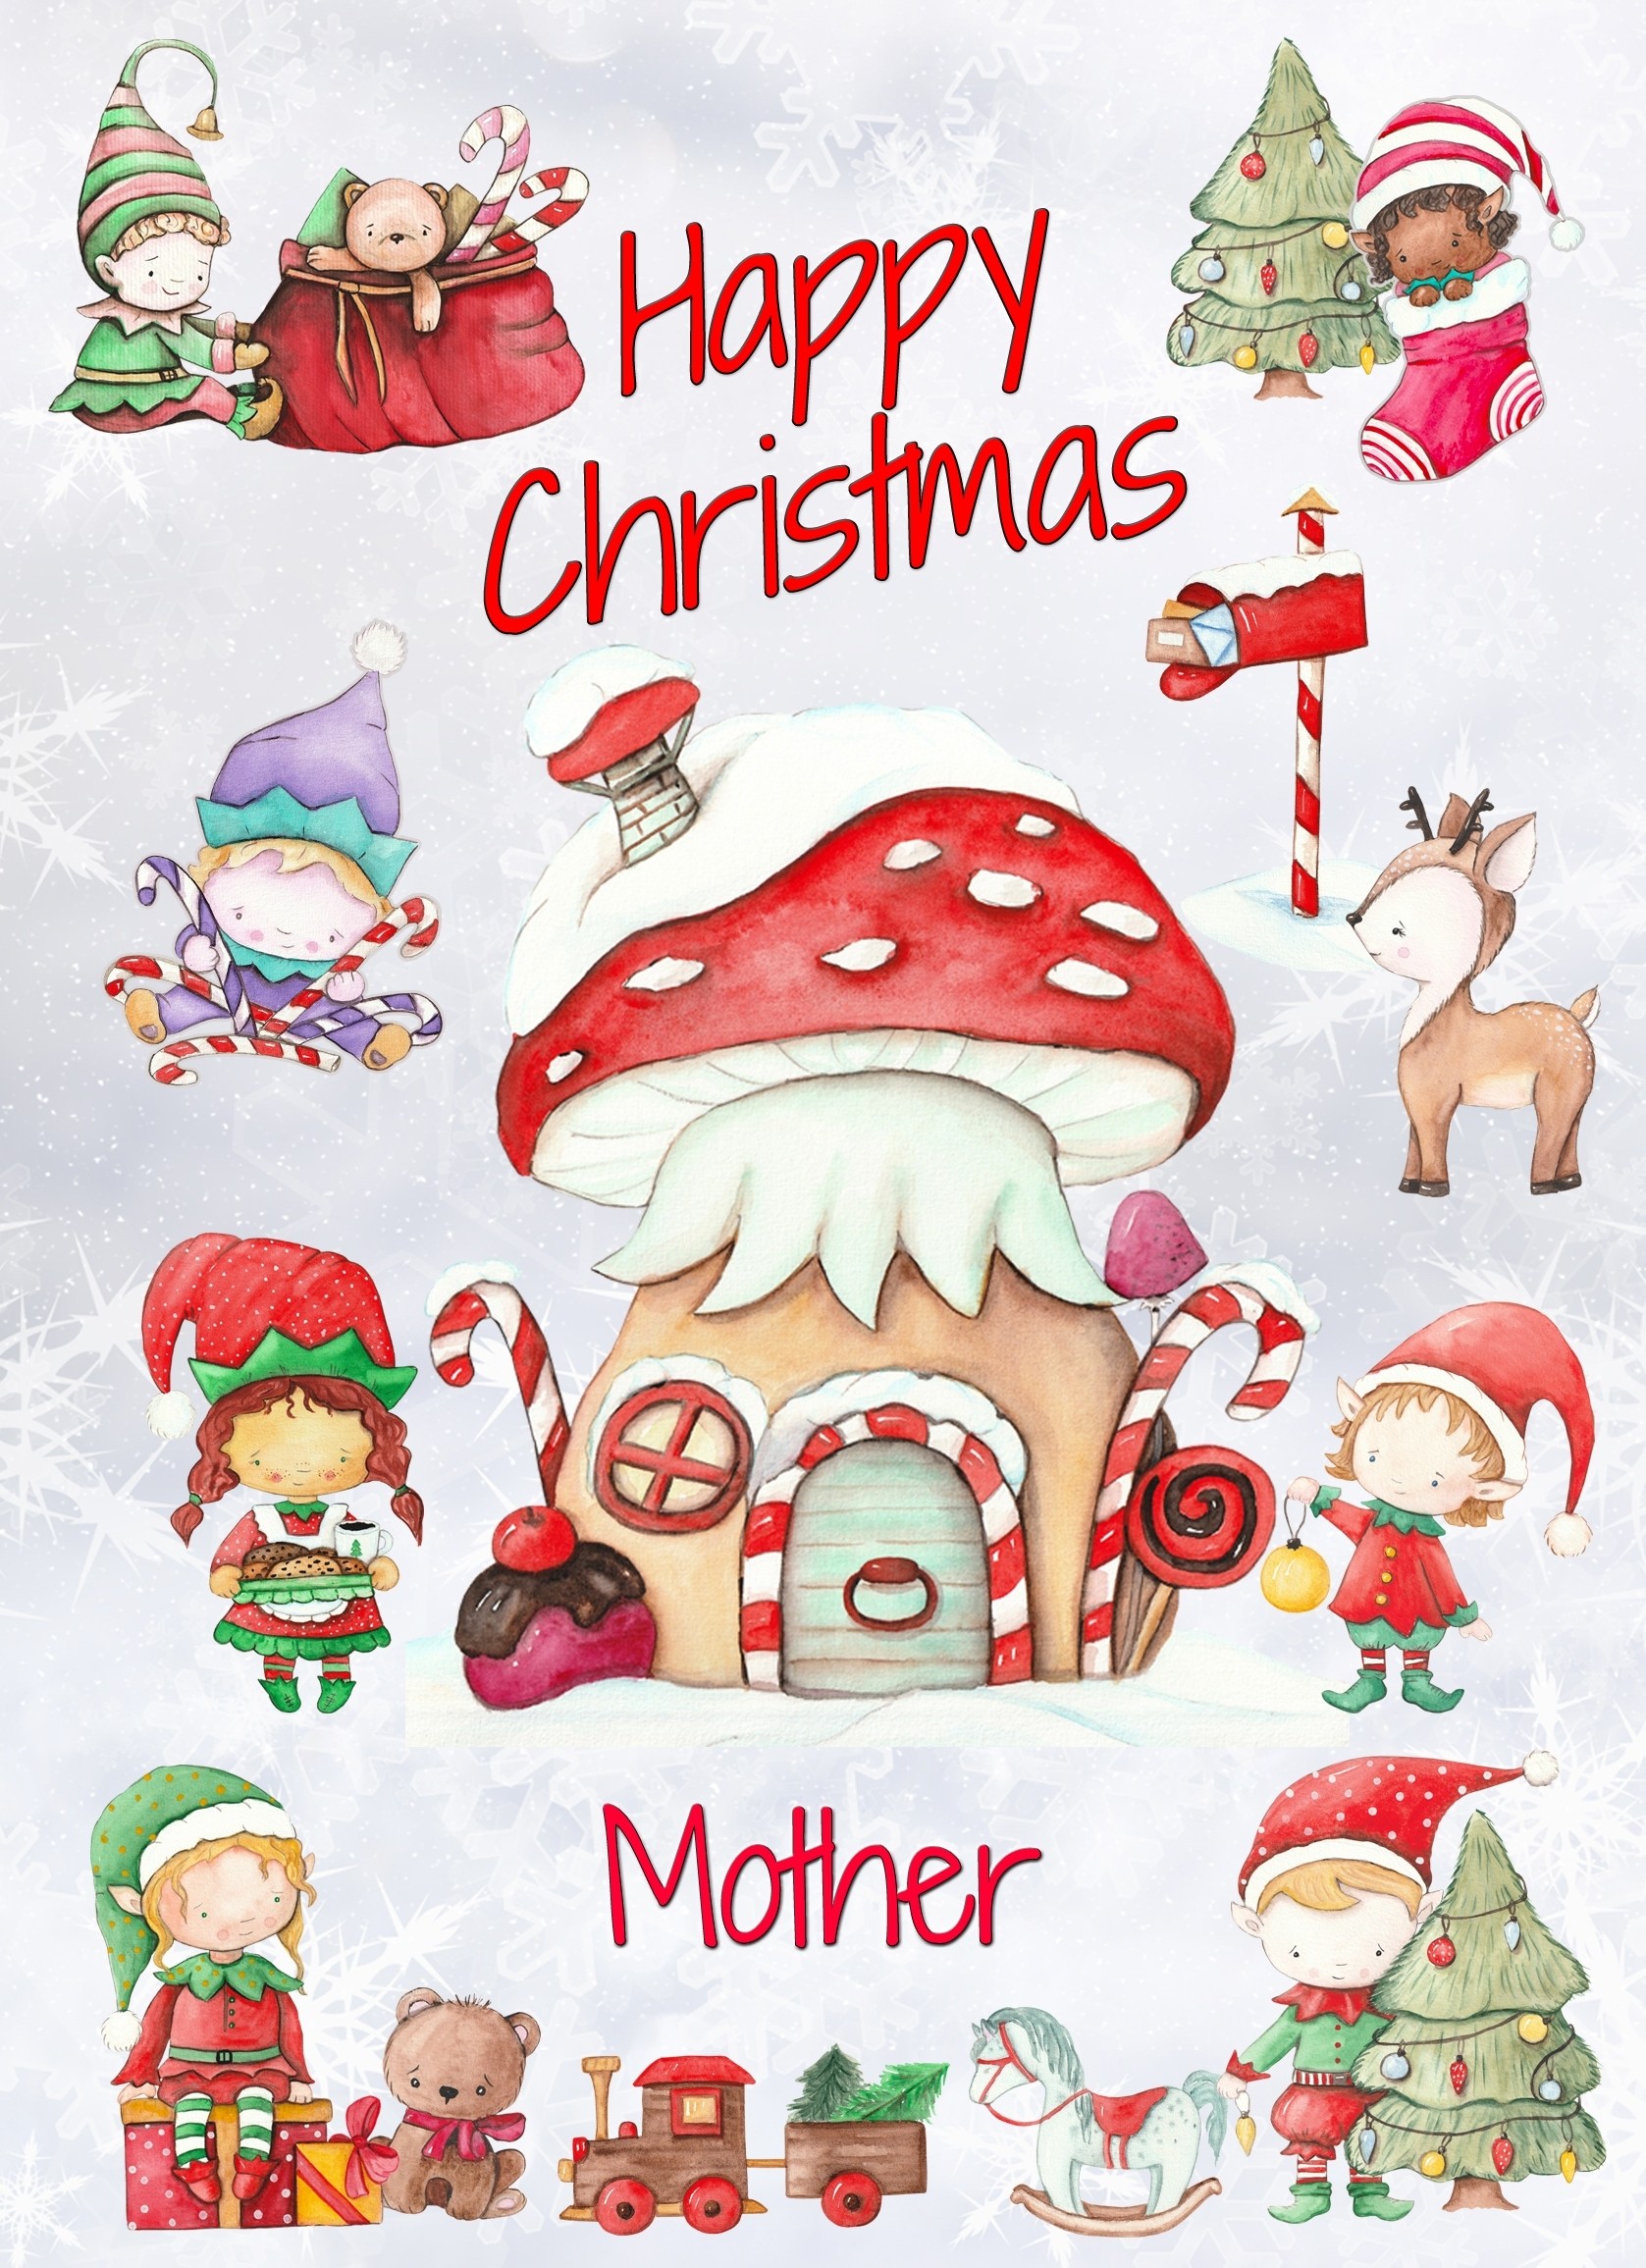 Christmas Card For Mother (Elf, White)